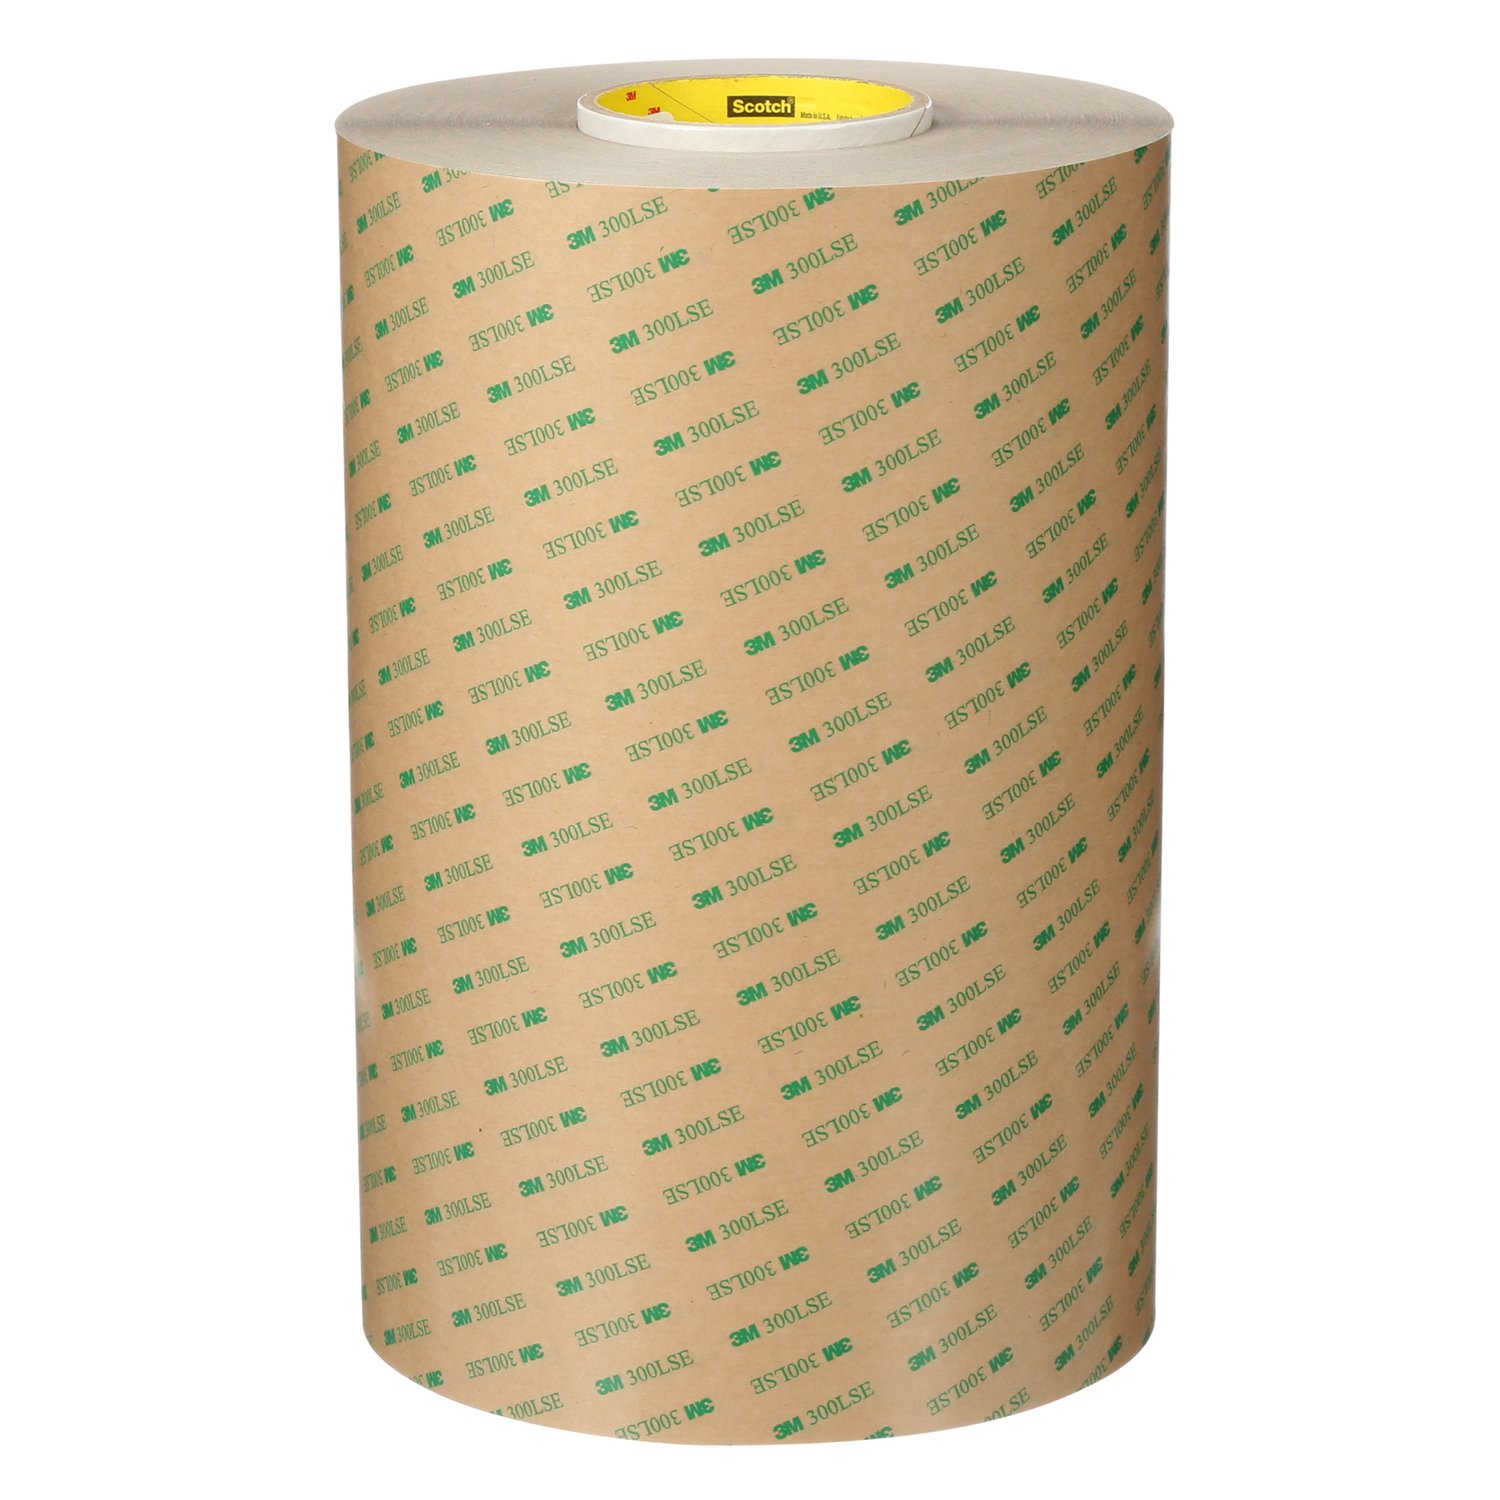 7100073020 - 3M Adhesive Transfer Tape Double Linered 8132LE, Clear, 2 mil, Roll,
Config